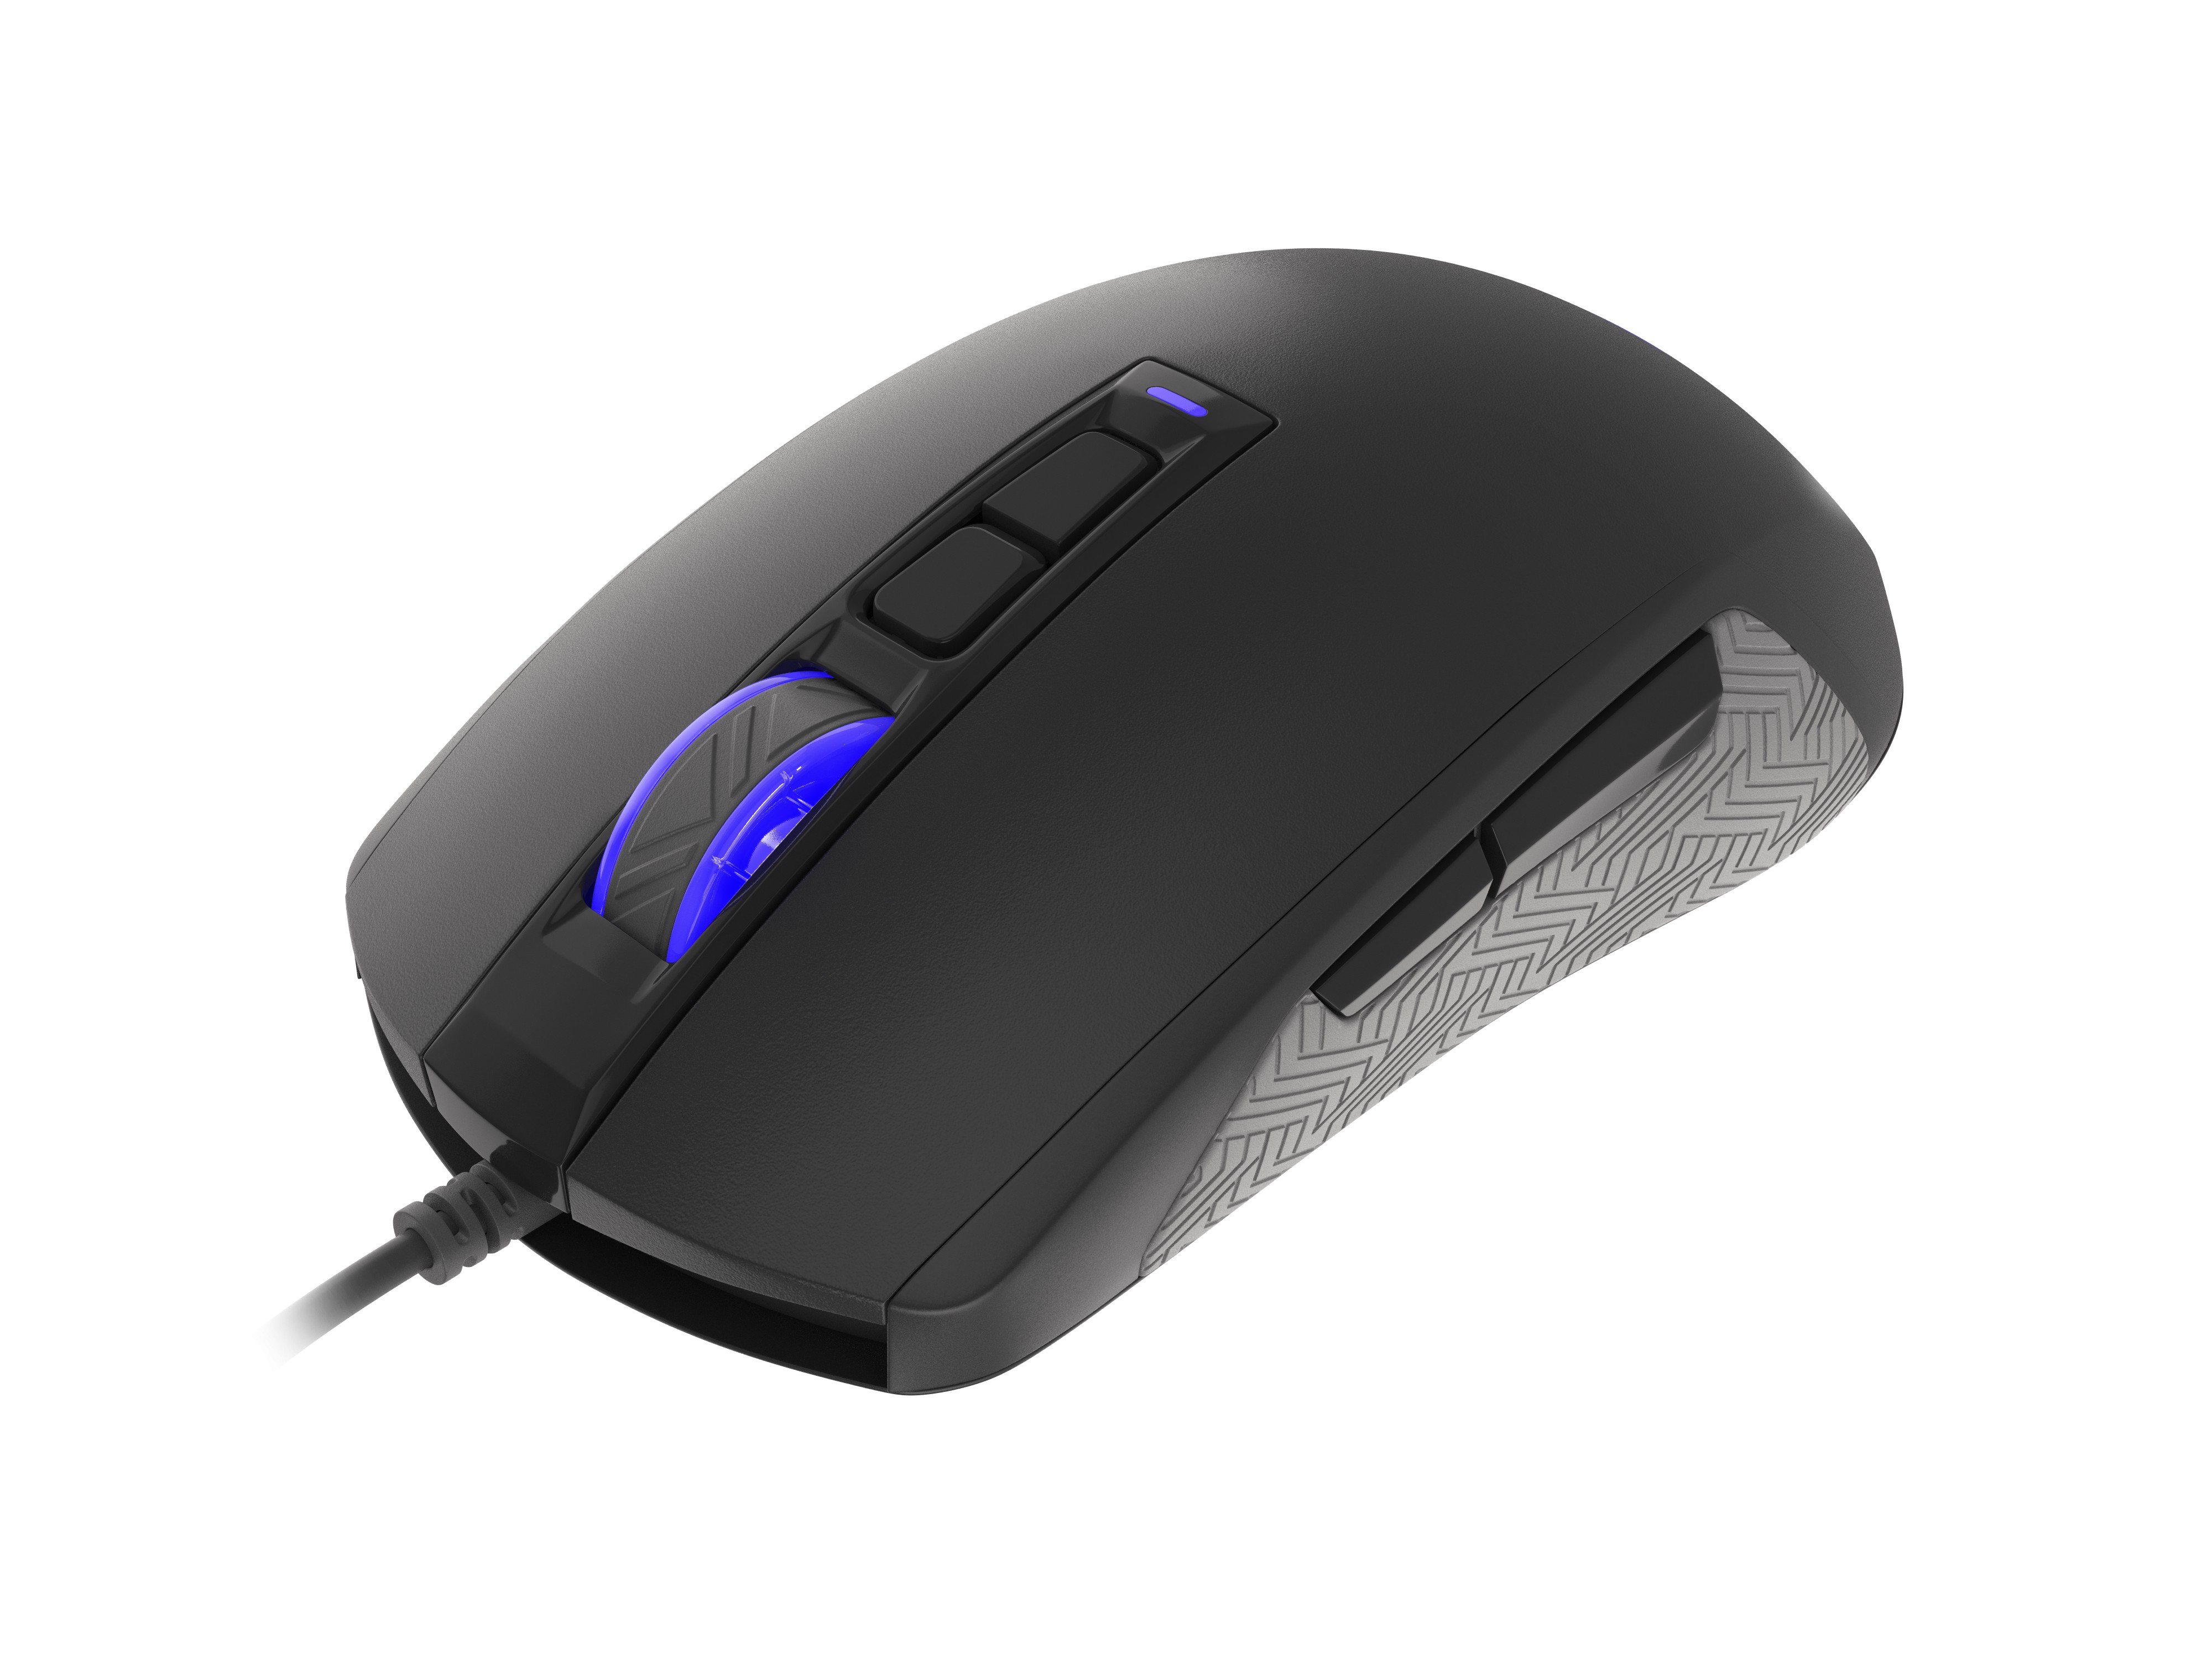 GENESIS KRYPTON 300 wired mouse | 4000 DPI